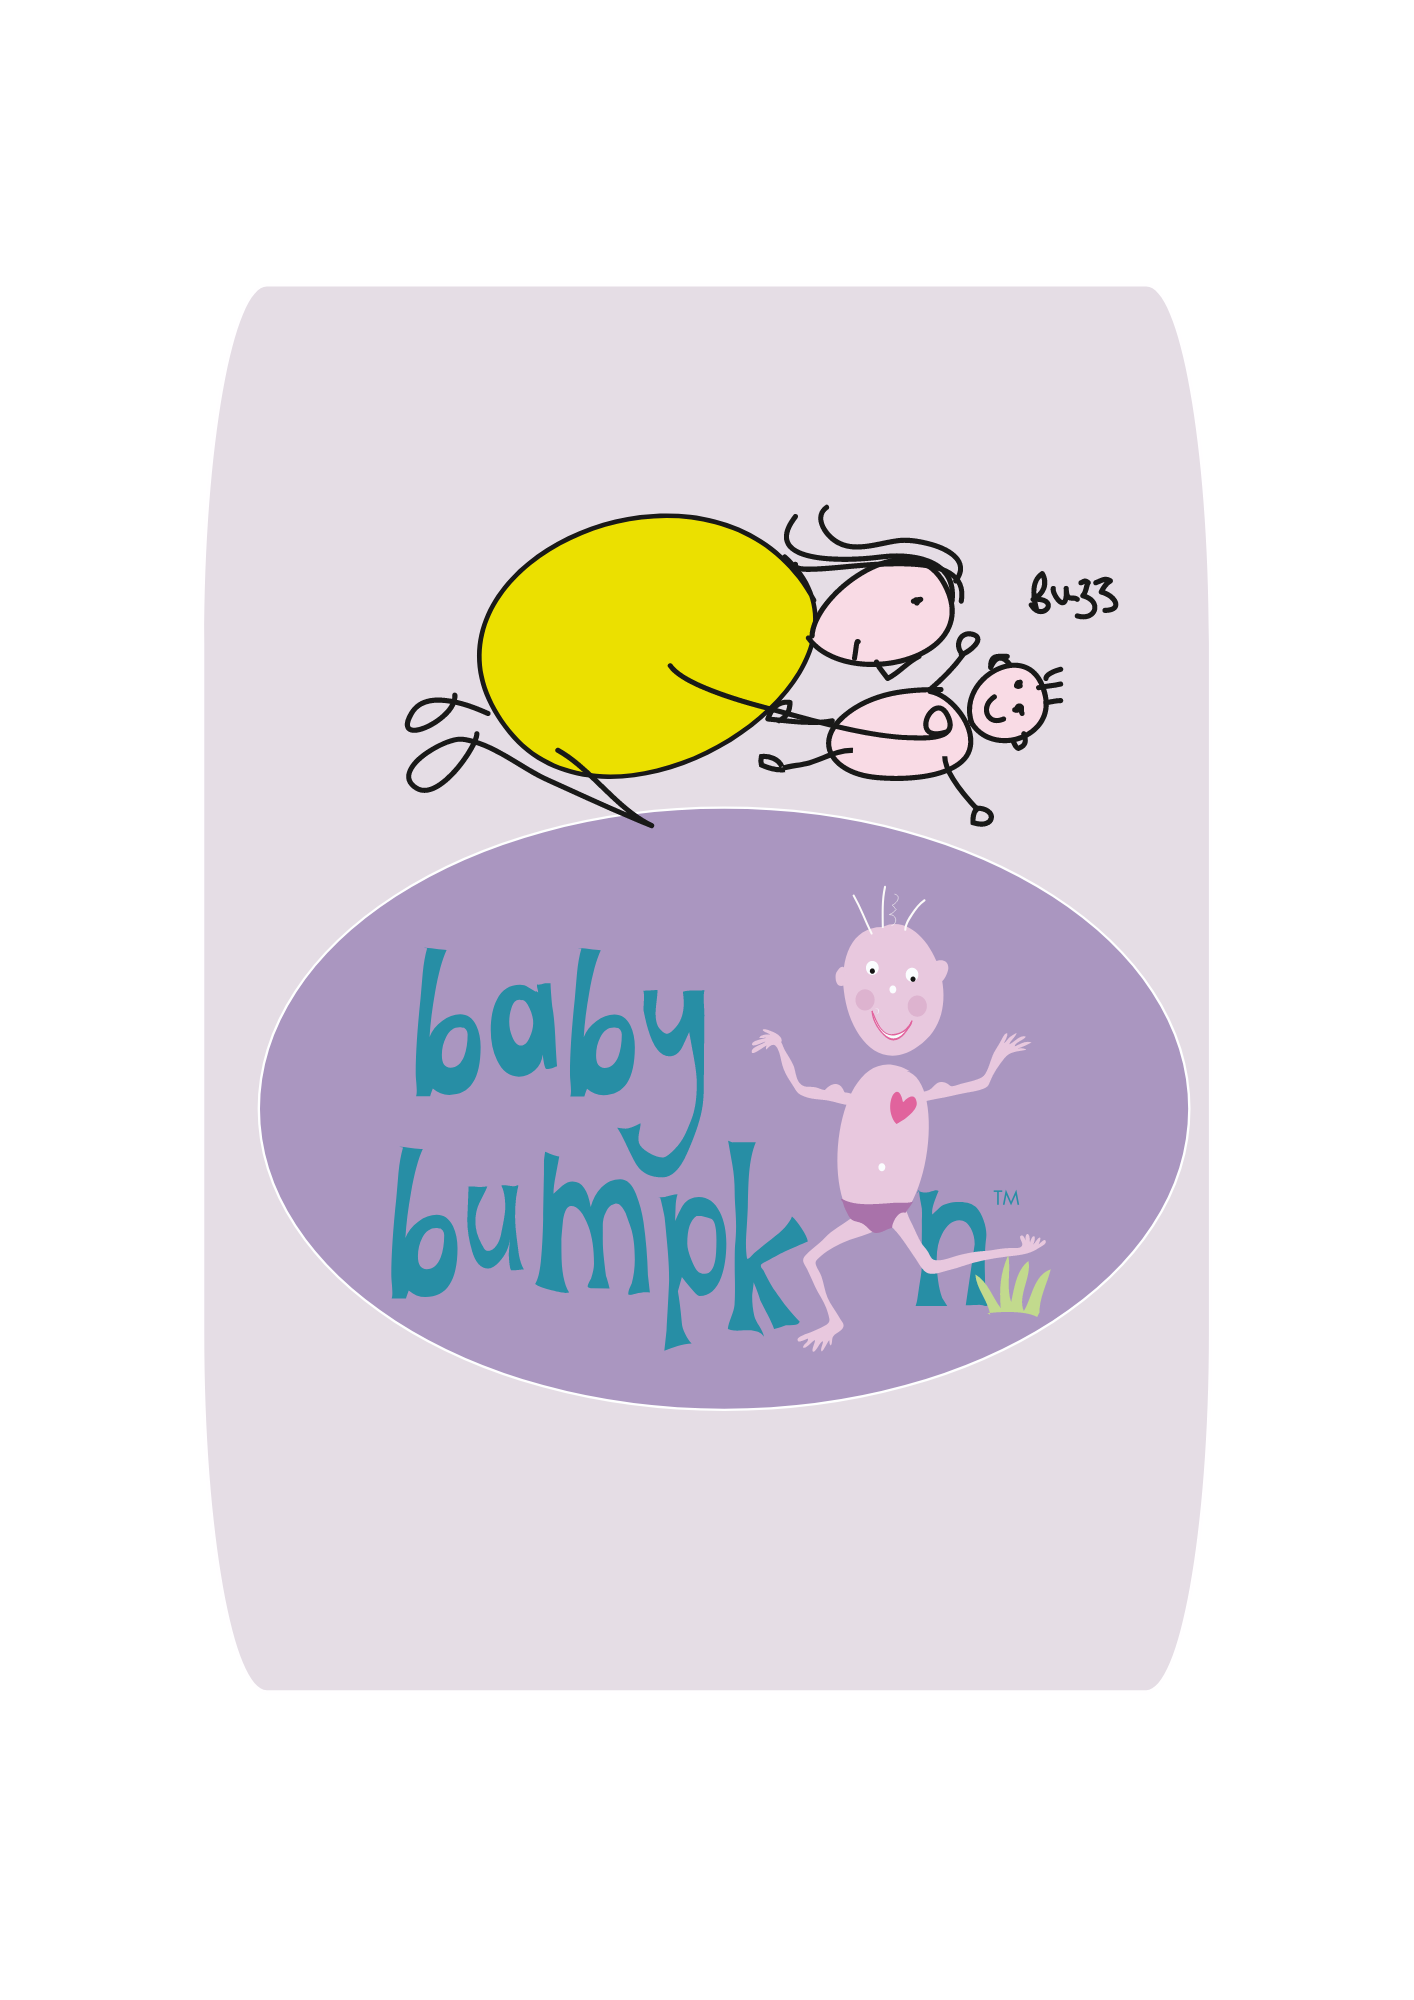 Baby Bumpkin Yoga by Children Inspired By Yoga South East Oxfordshire's logo